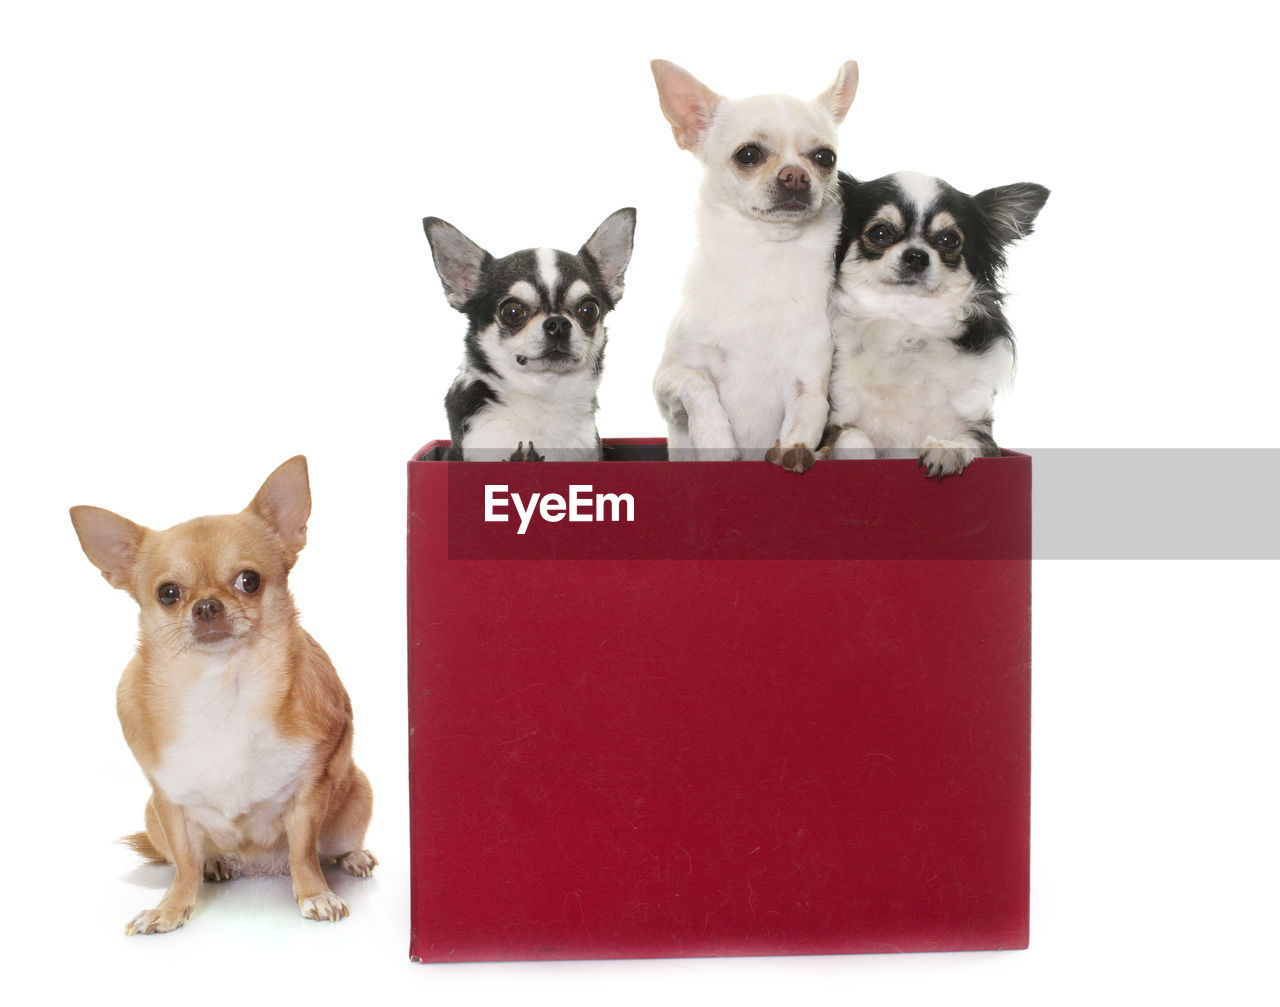 Portrait of chihuahuas with red box against white background